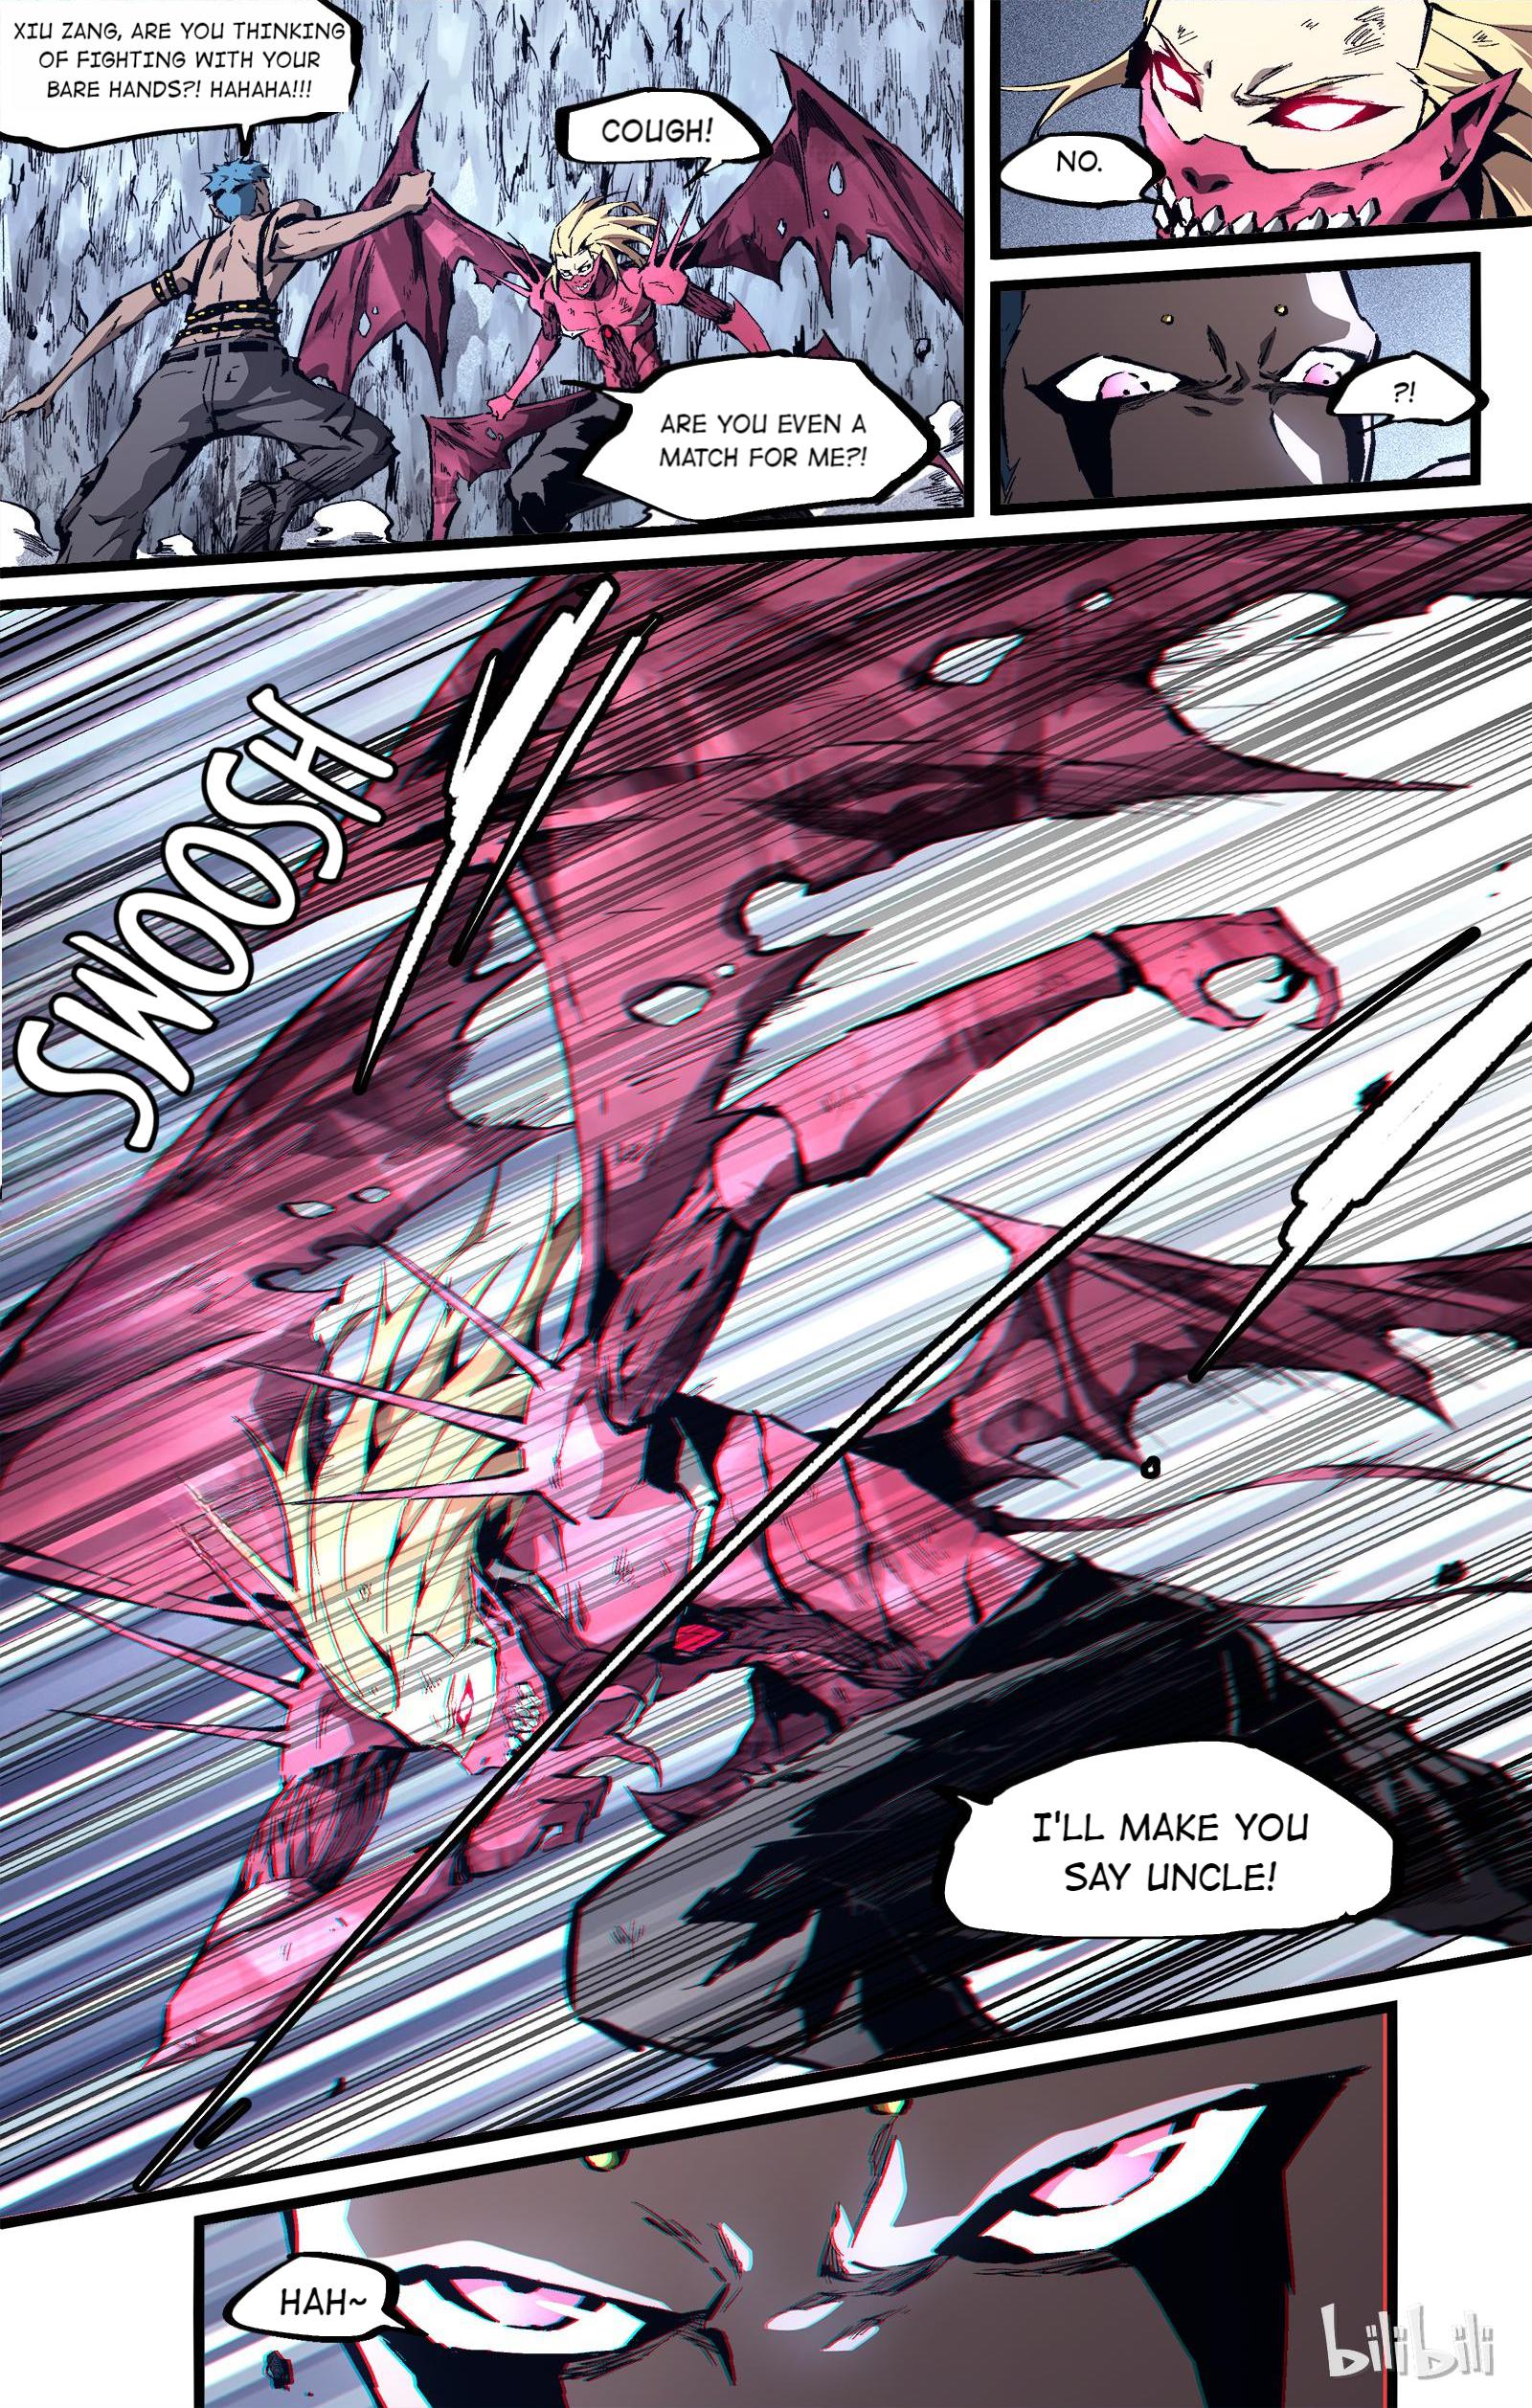 Lawless Zone Chapter 96 - Page 7